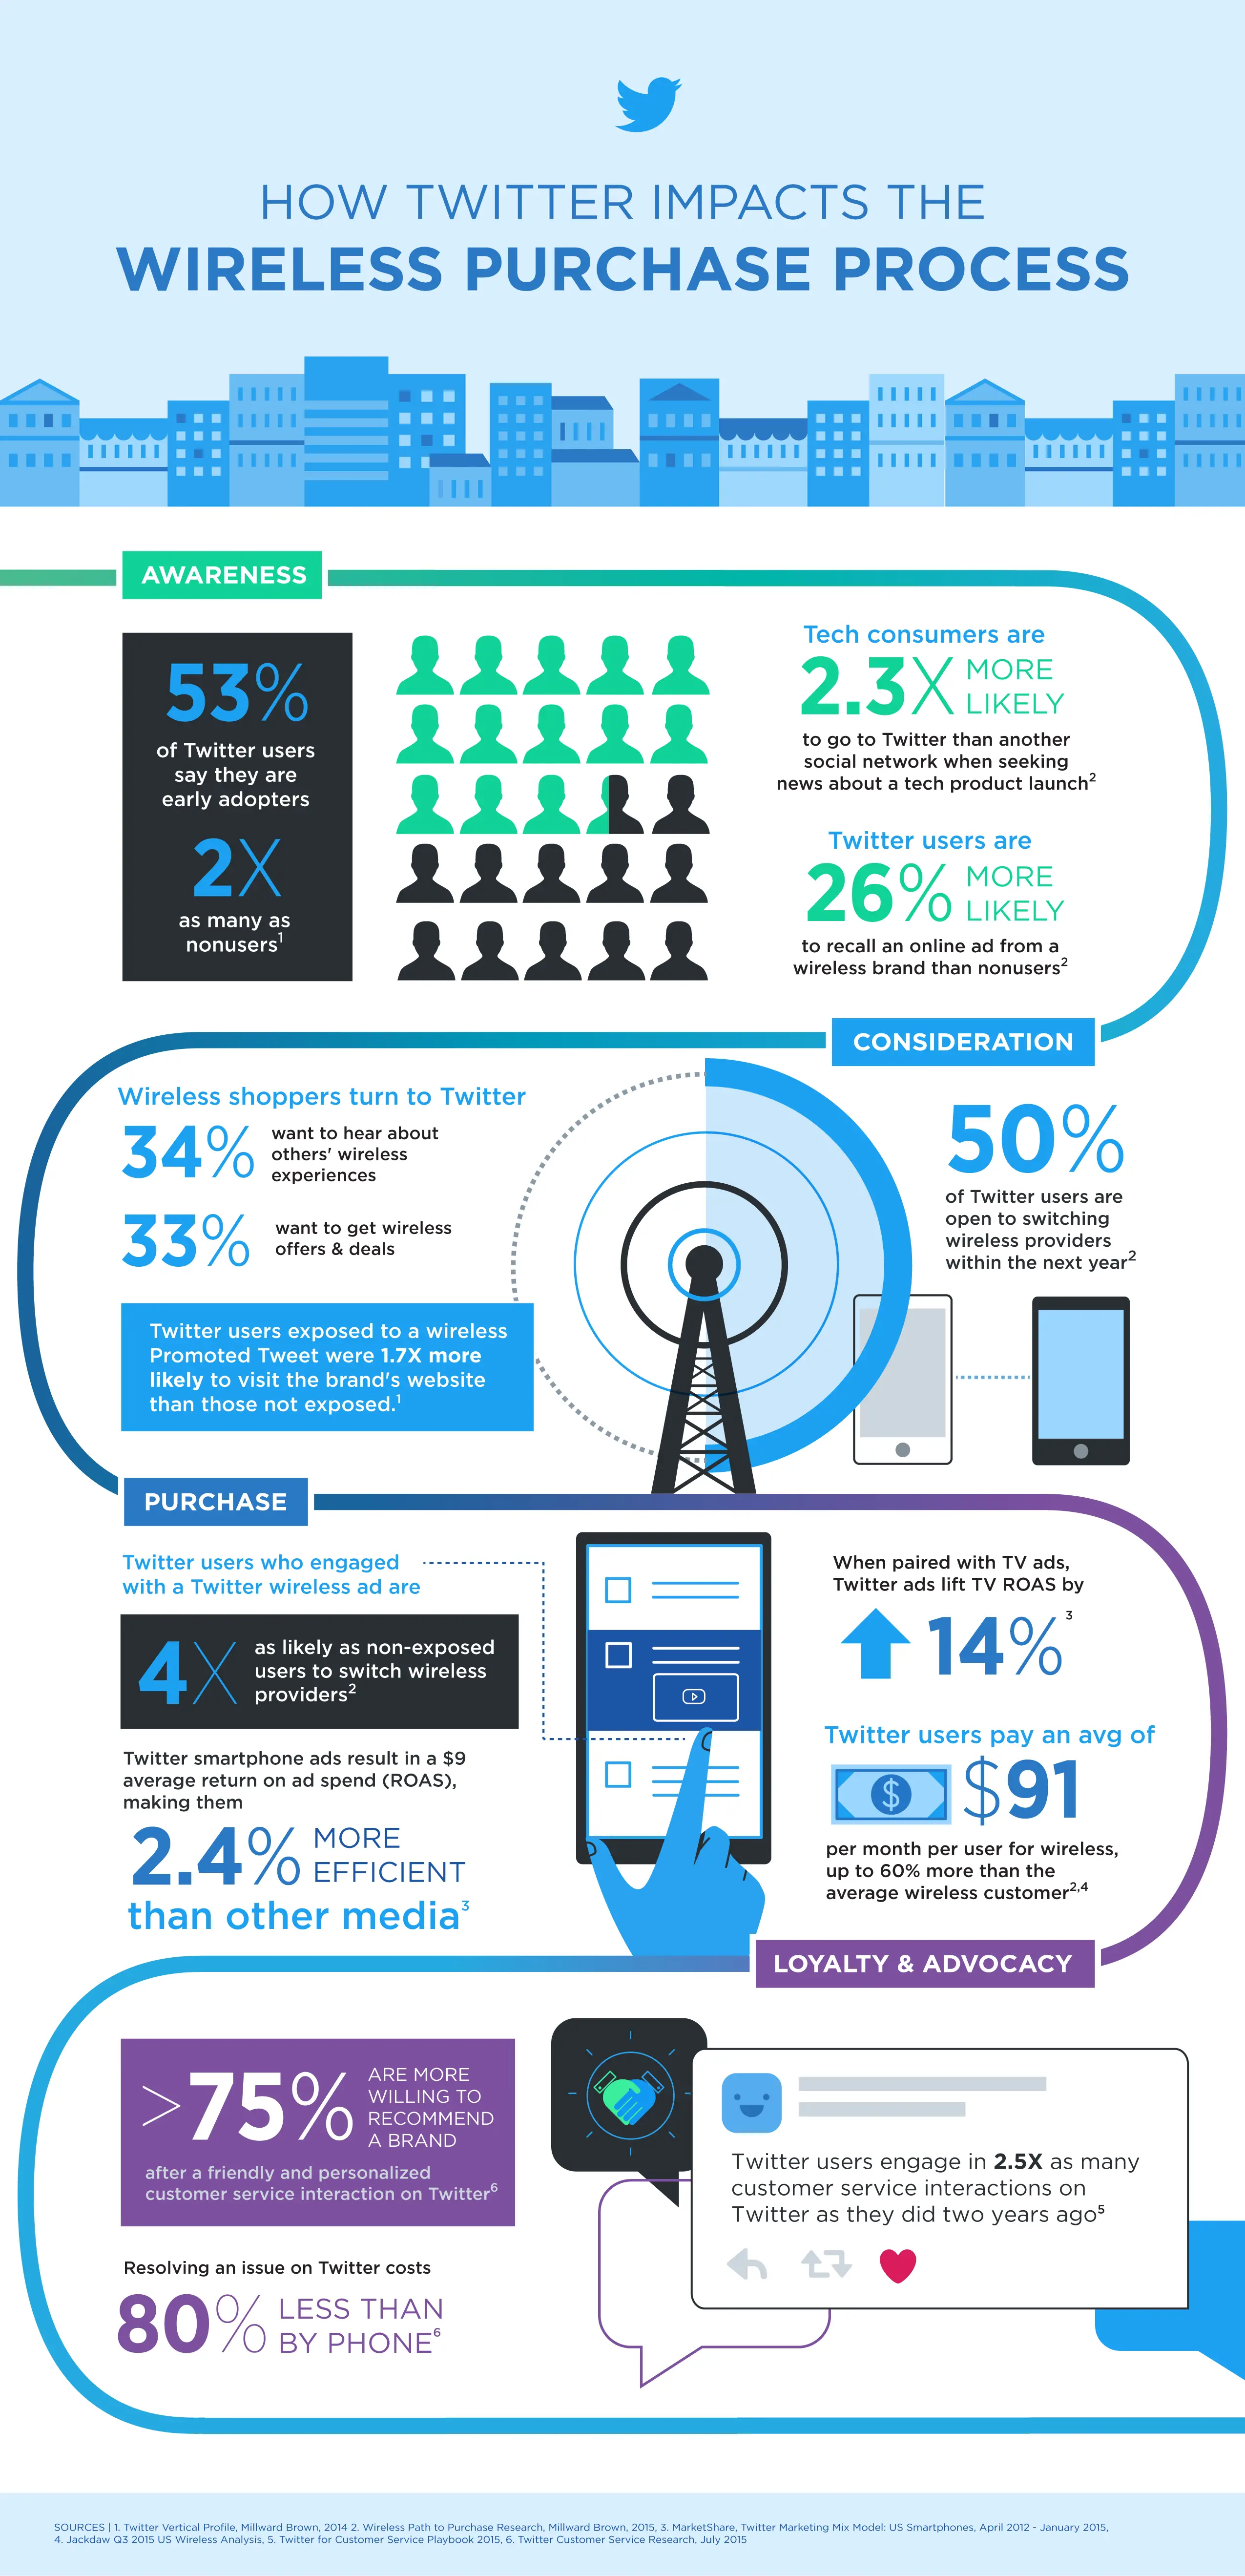 wersm-how-twitter-impacts-the-wireless-purchase-process-infographic-img